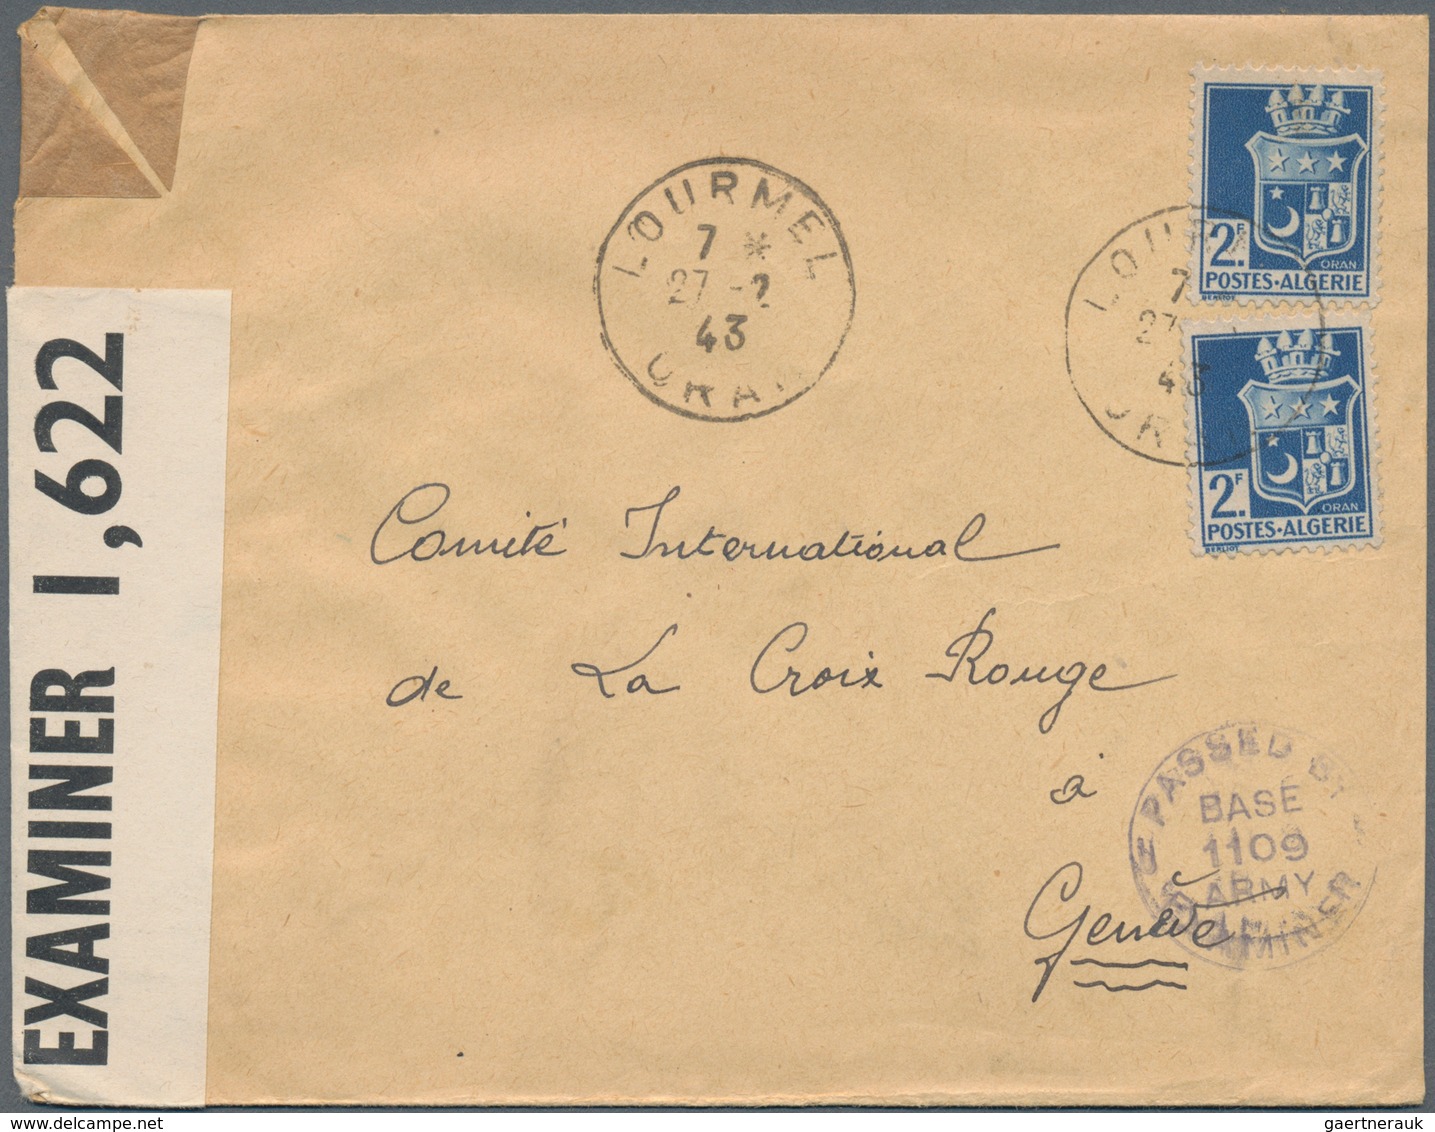 Algerien: 1940/44 ca. 460 letters mainly to the Red Cross in Geneva, almost everything with various